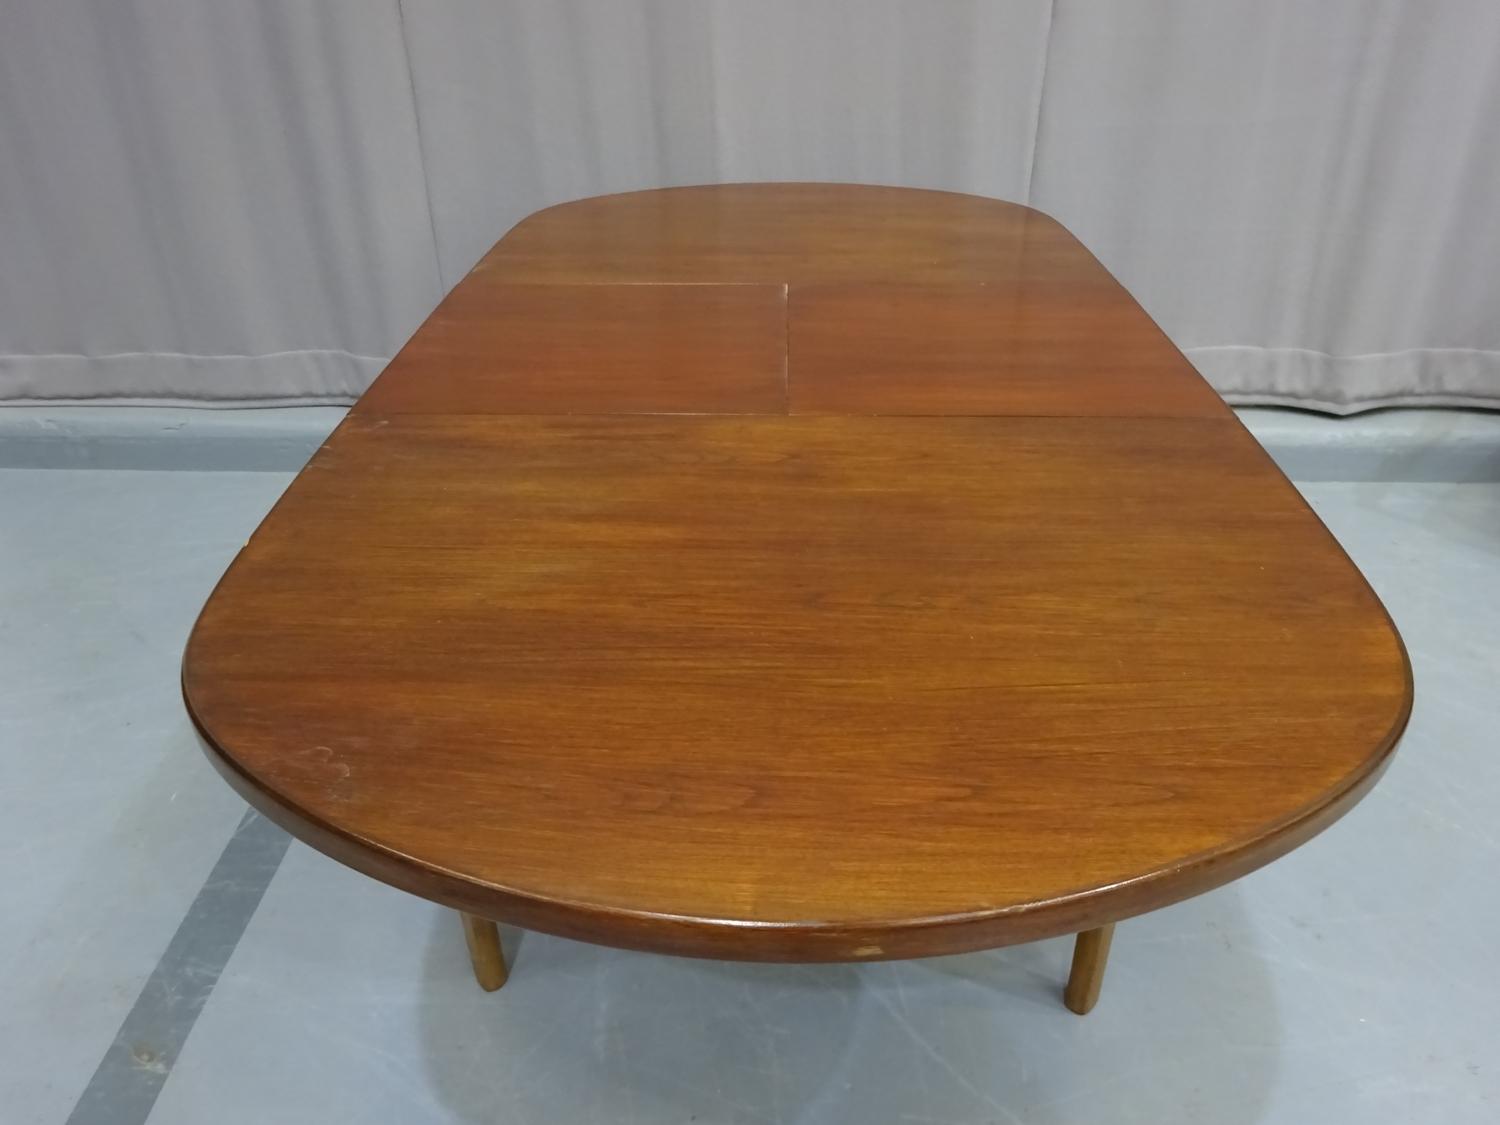 Dark oval table - Image 3 of 6